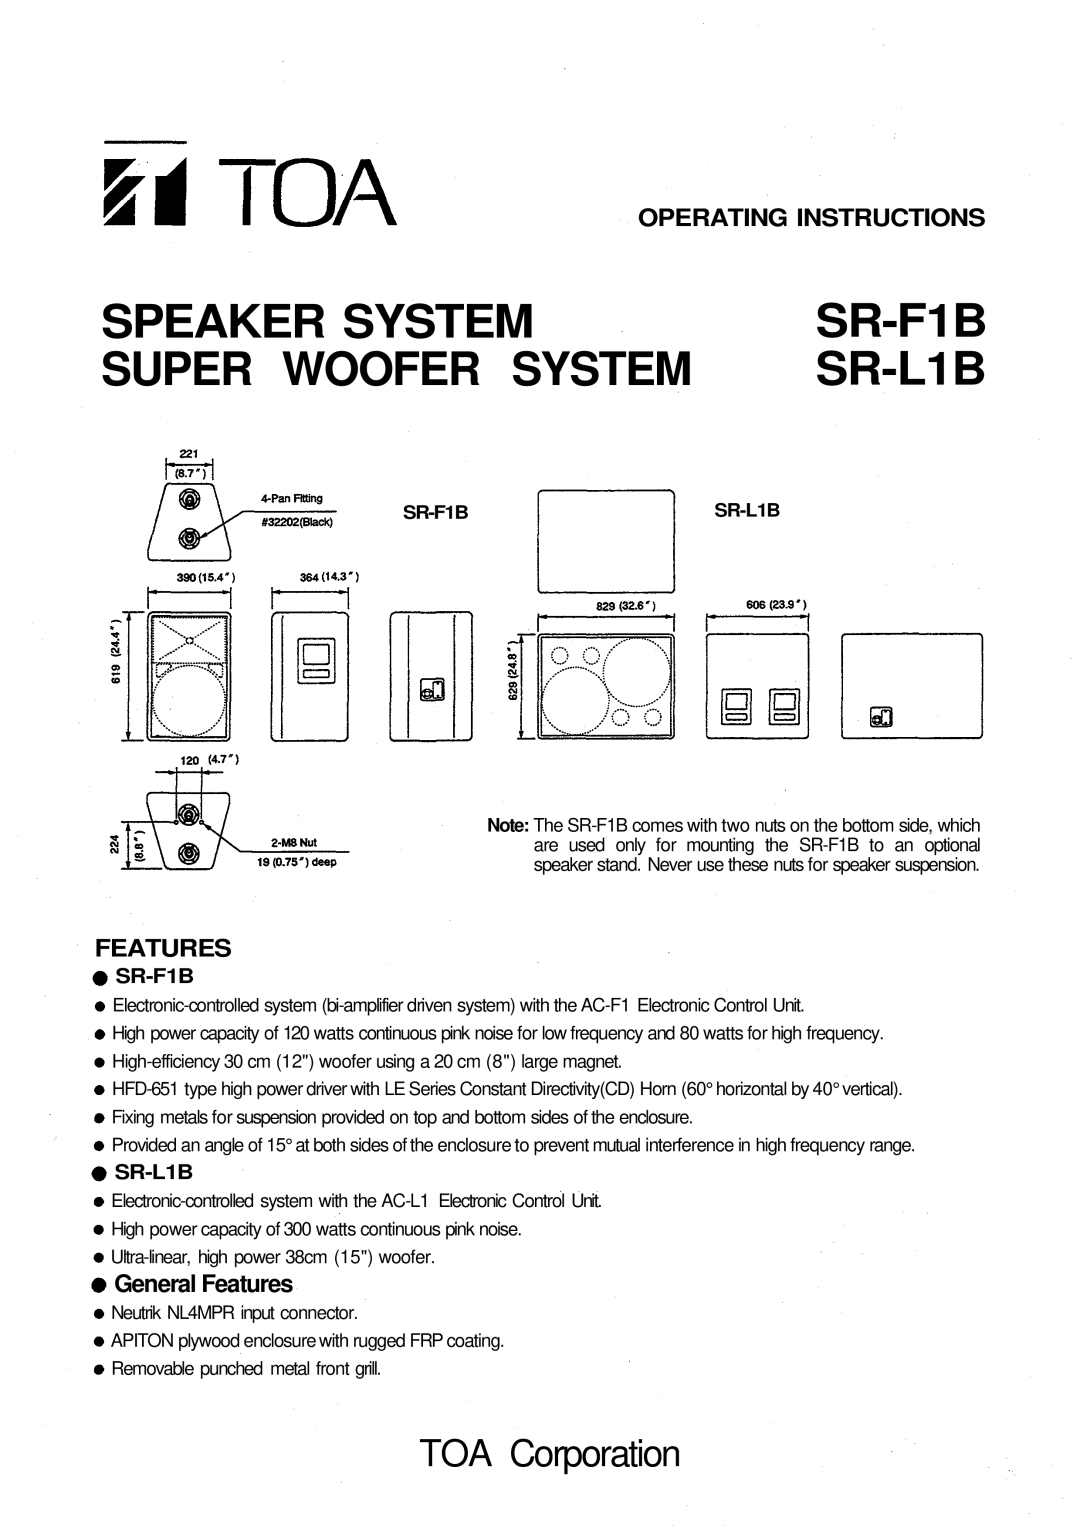 Verizon SR-F1B manual TOA Corporation, Operating Instructions, General Features, Speaker System, Super Woofer System 